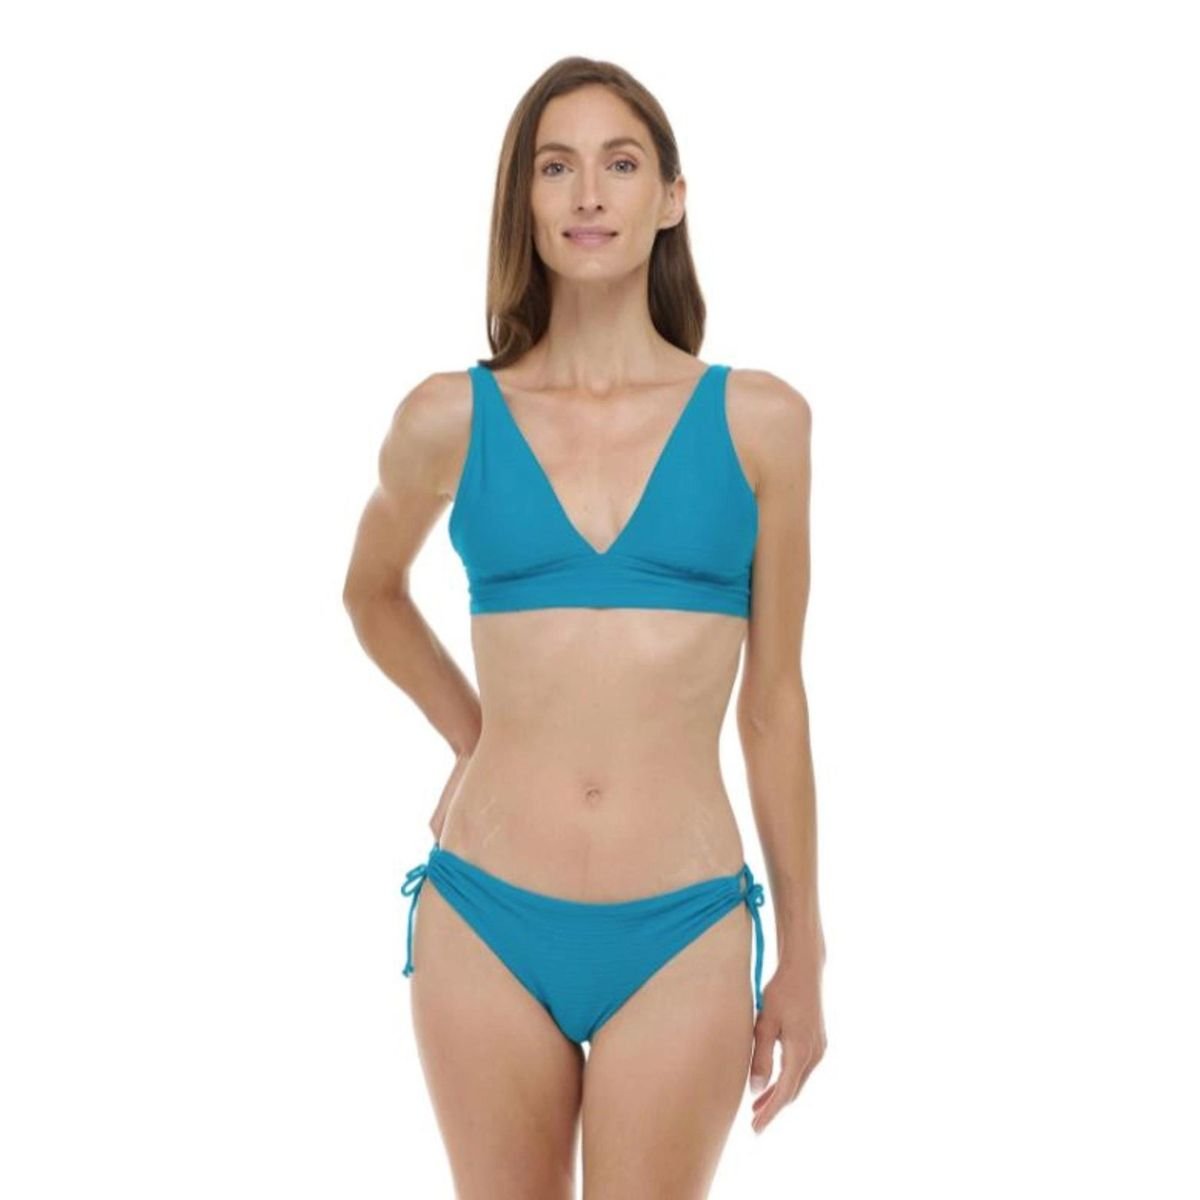 Body Glove Gems Isabella in Tranquility - BoardCo